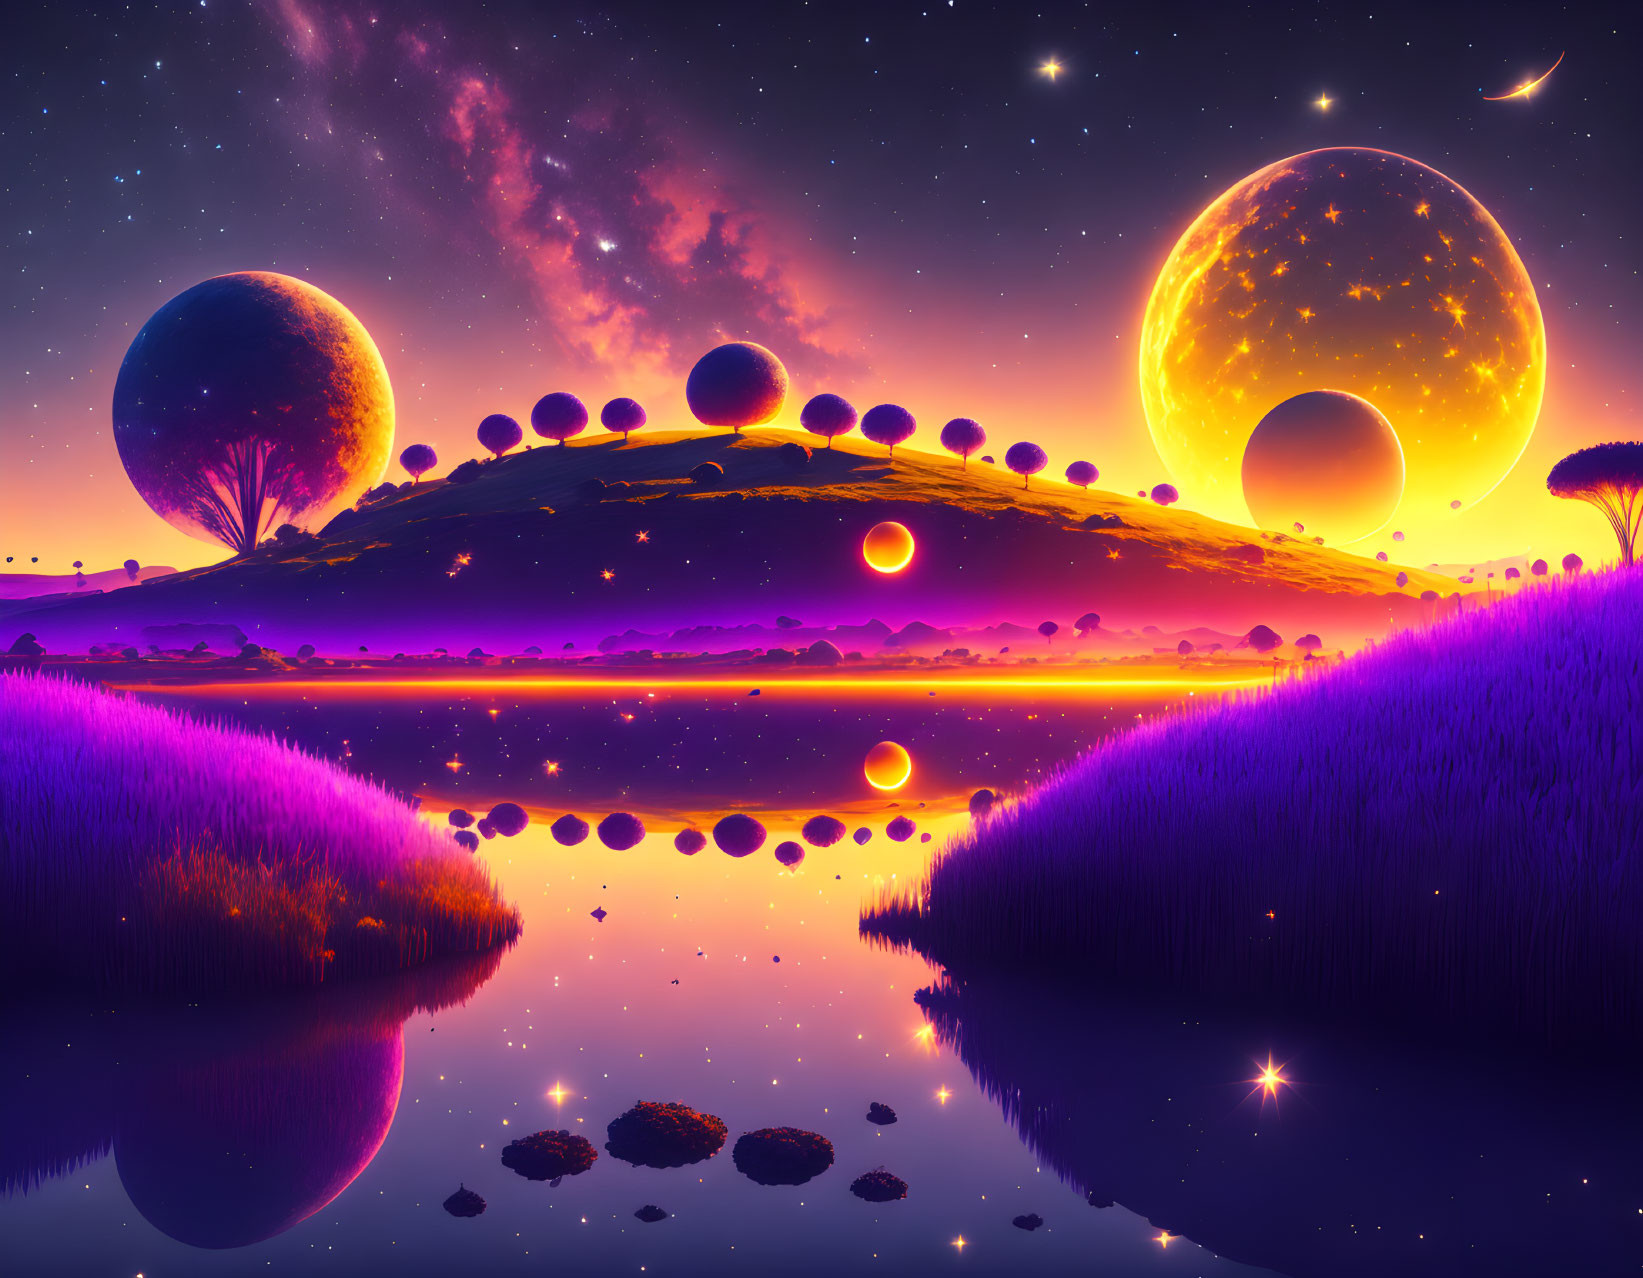 Colorful digital art landscape with celestial bodies, water reflection, purple foliage, and starlit sky.